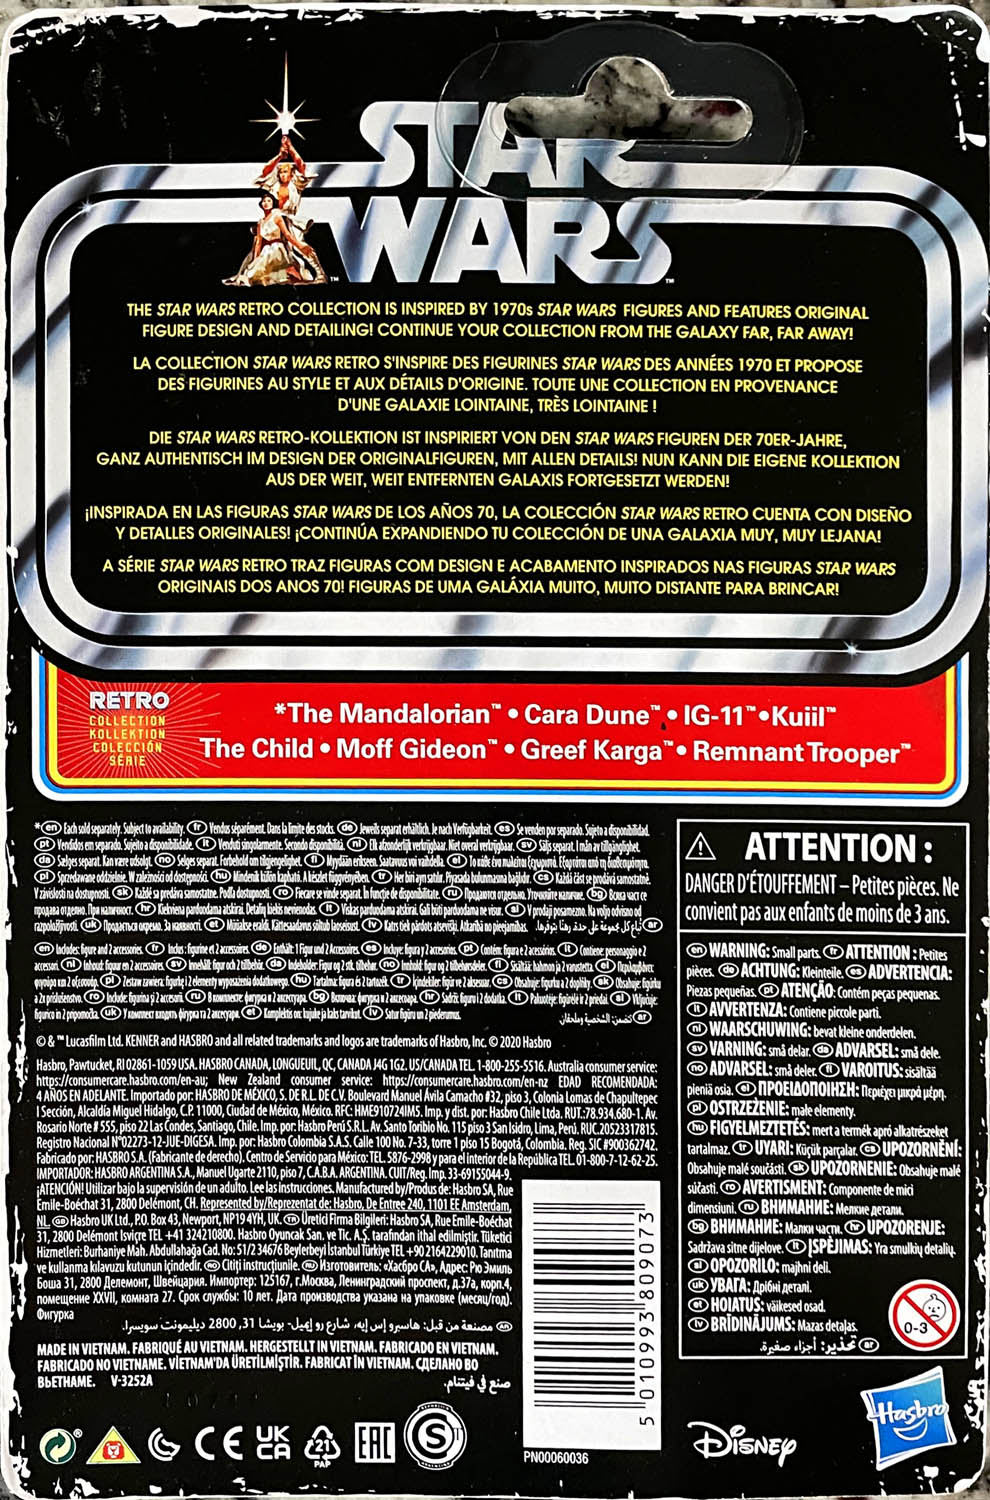 The Mandalorian - Kenner/Hasbro (Star Wars Retro Collection) action figure collectible - Main Image 2